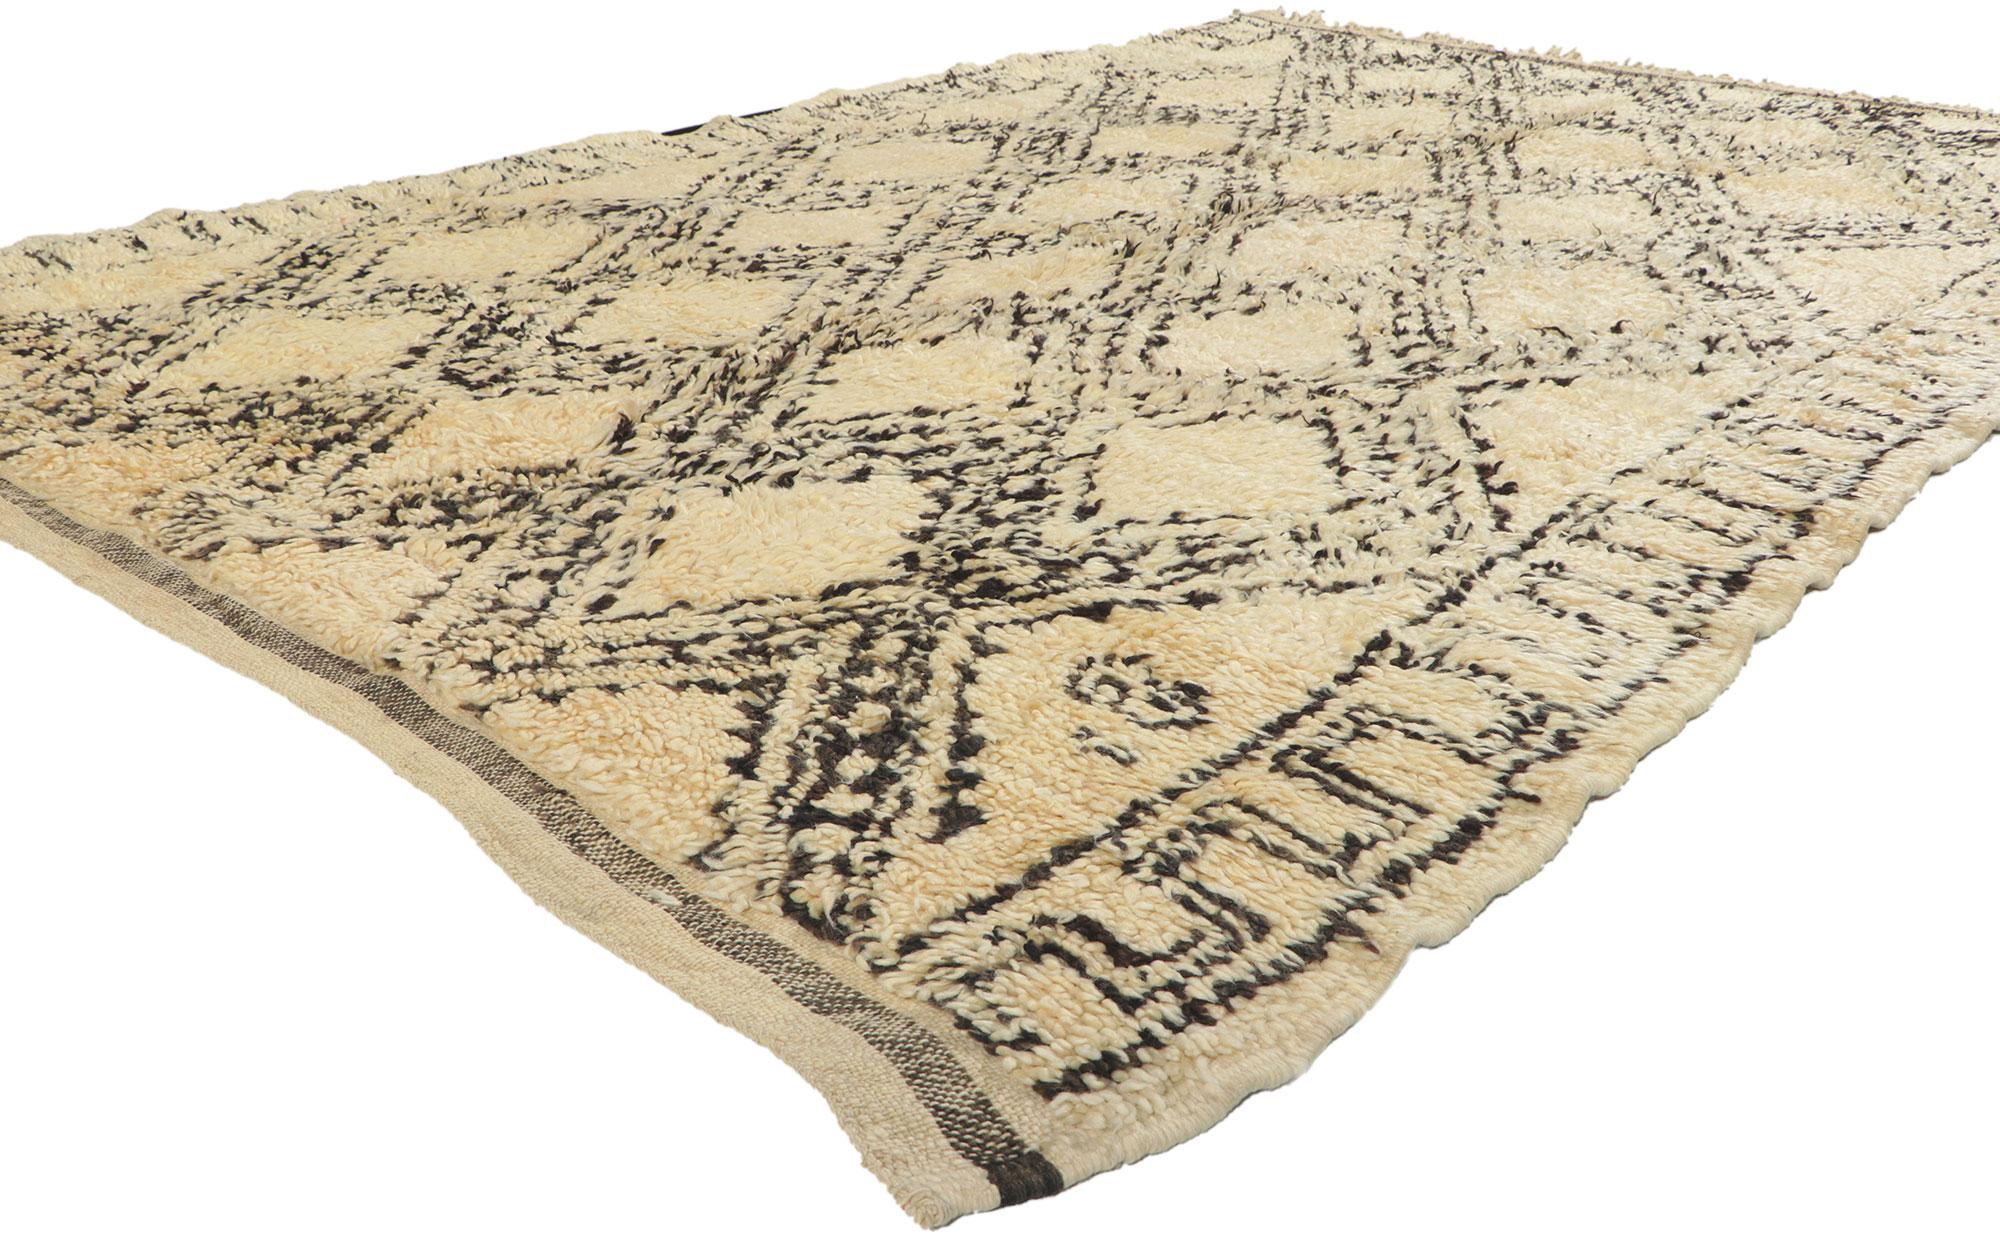 78395 Vintage Moroccan Beni Ourain rug, 05'11 x 08'06. With its simplicity, plush pile, incredible detail and texture, this hand knotted wool vintage Beni Ourain Moroccan rug is a captivating vision of woven beauty. The eye-catching diamond trellis